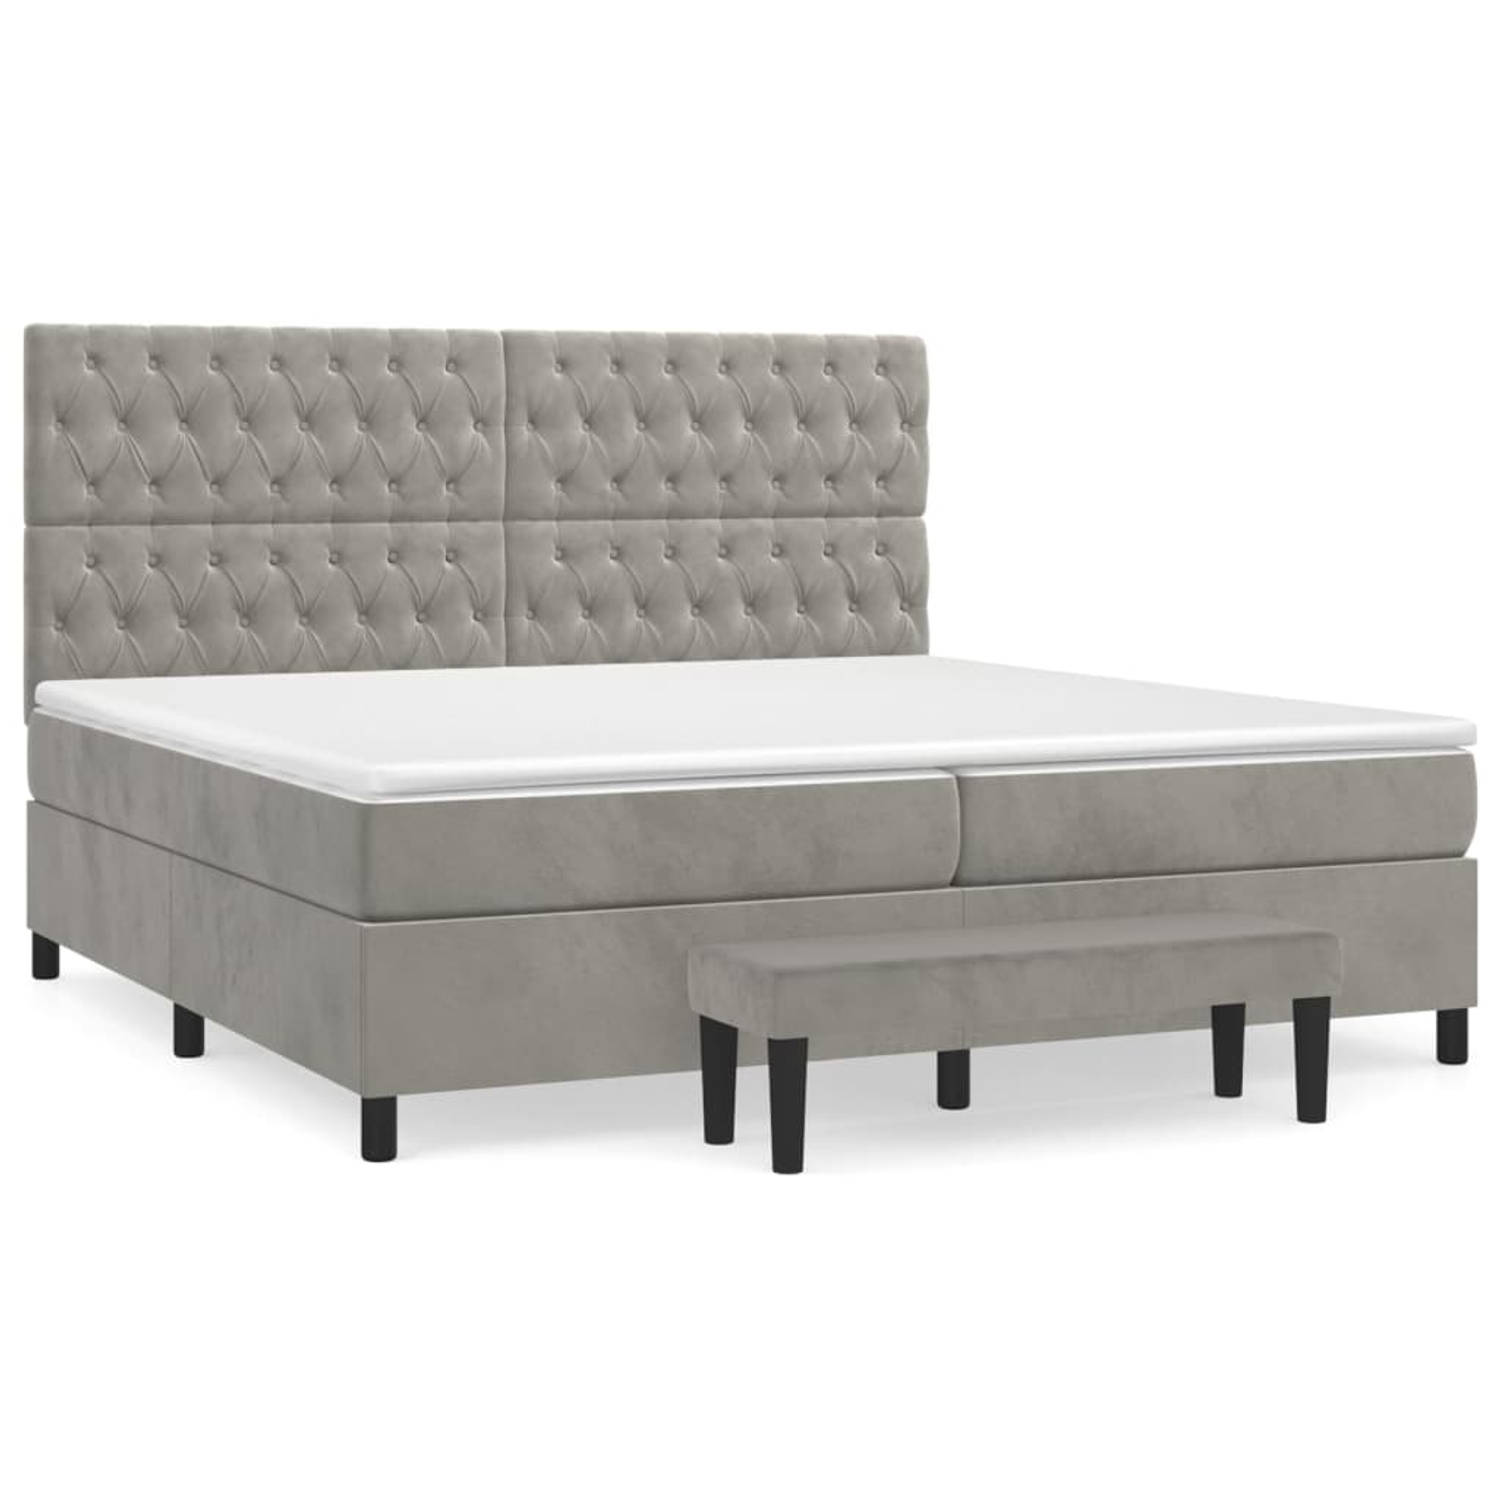 The Living Store Boxspringbed - 203 x 200 x 118/128 cm - Zacht fluweel